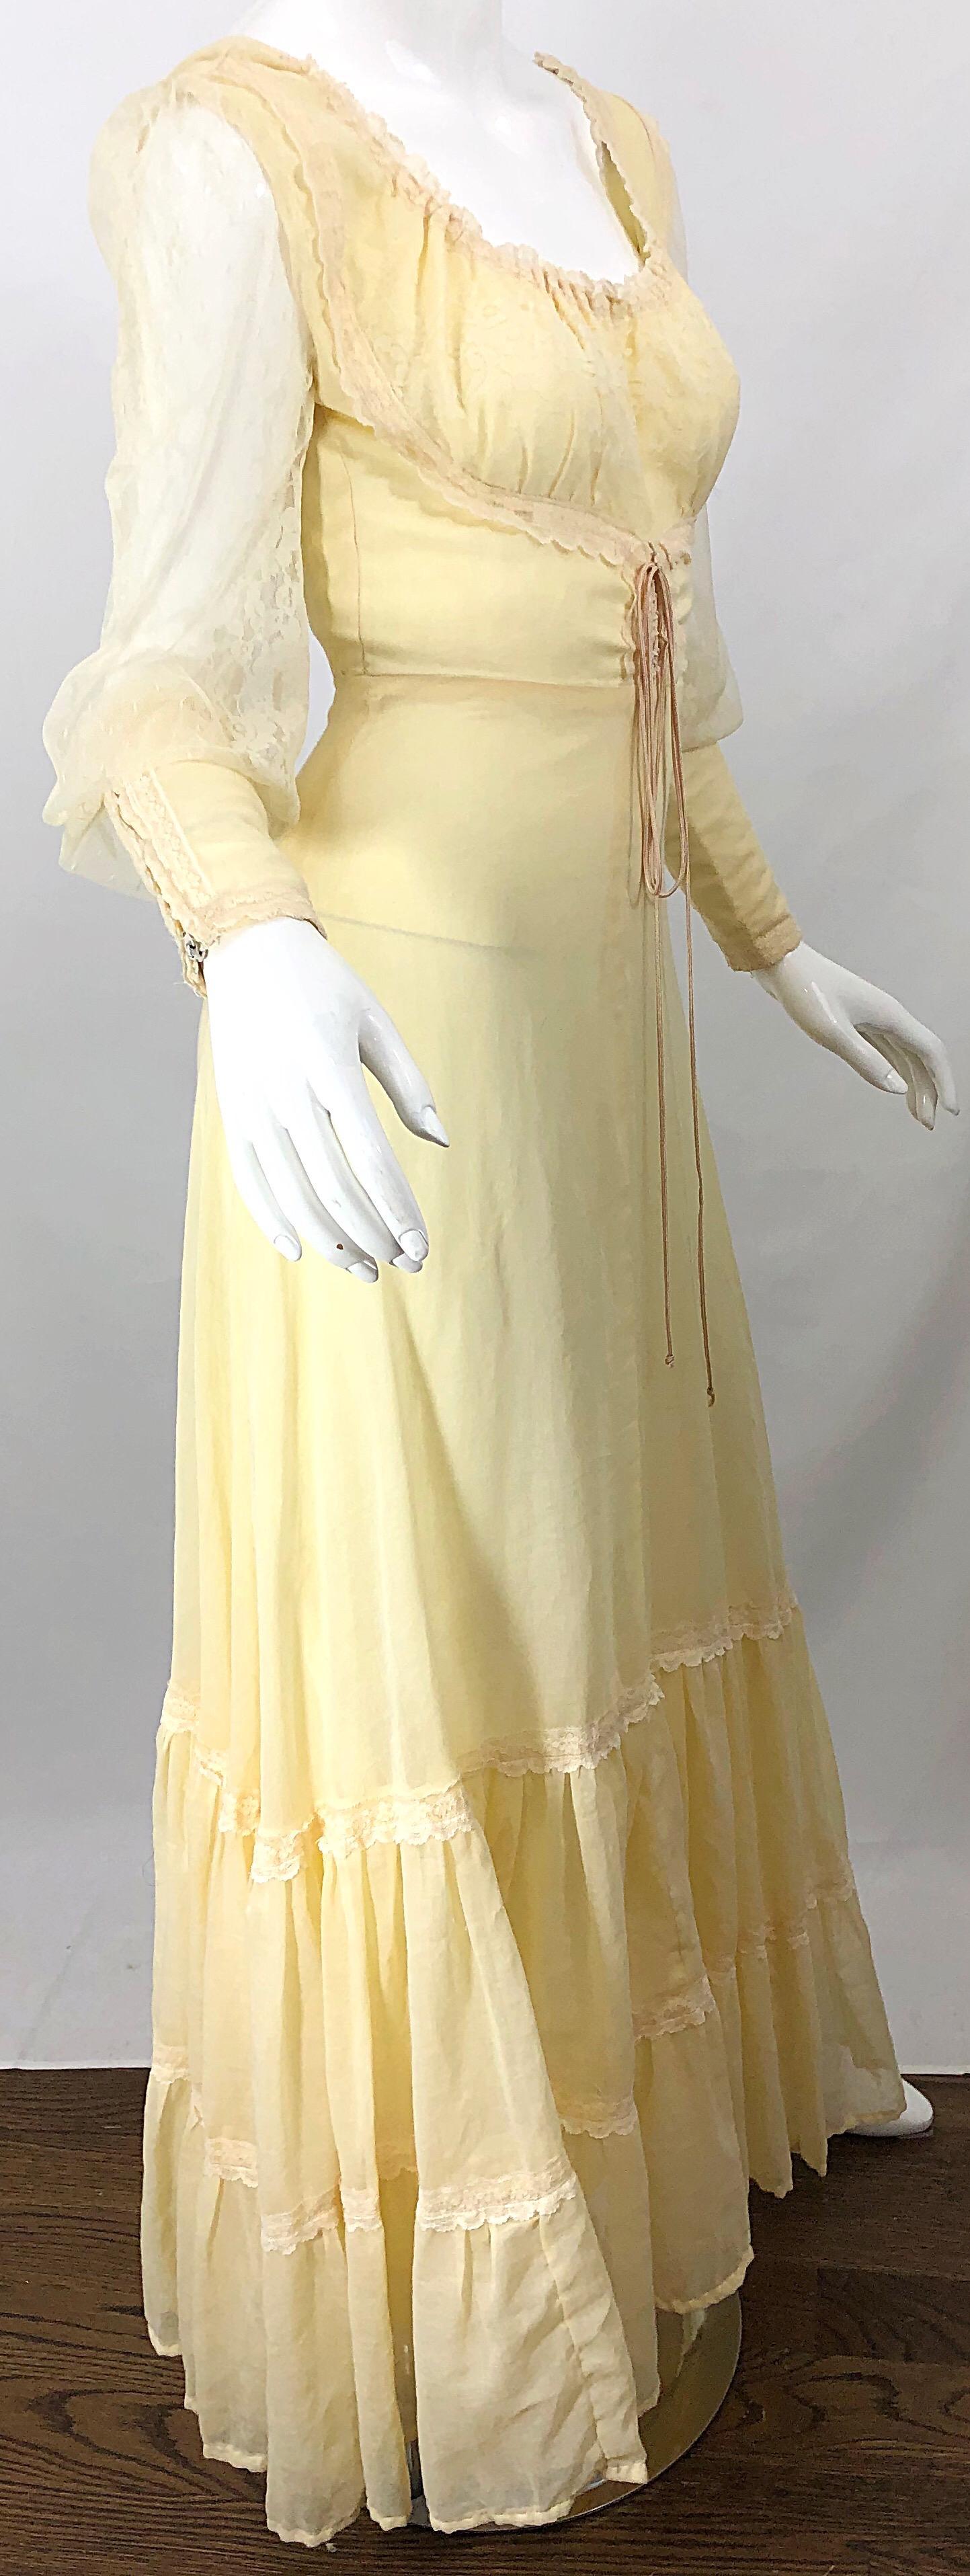 Beige 1970s Victorian Inspired Pale Yellow Cotton Voile + Lace Peasant 70s Maxi Dress For Sale